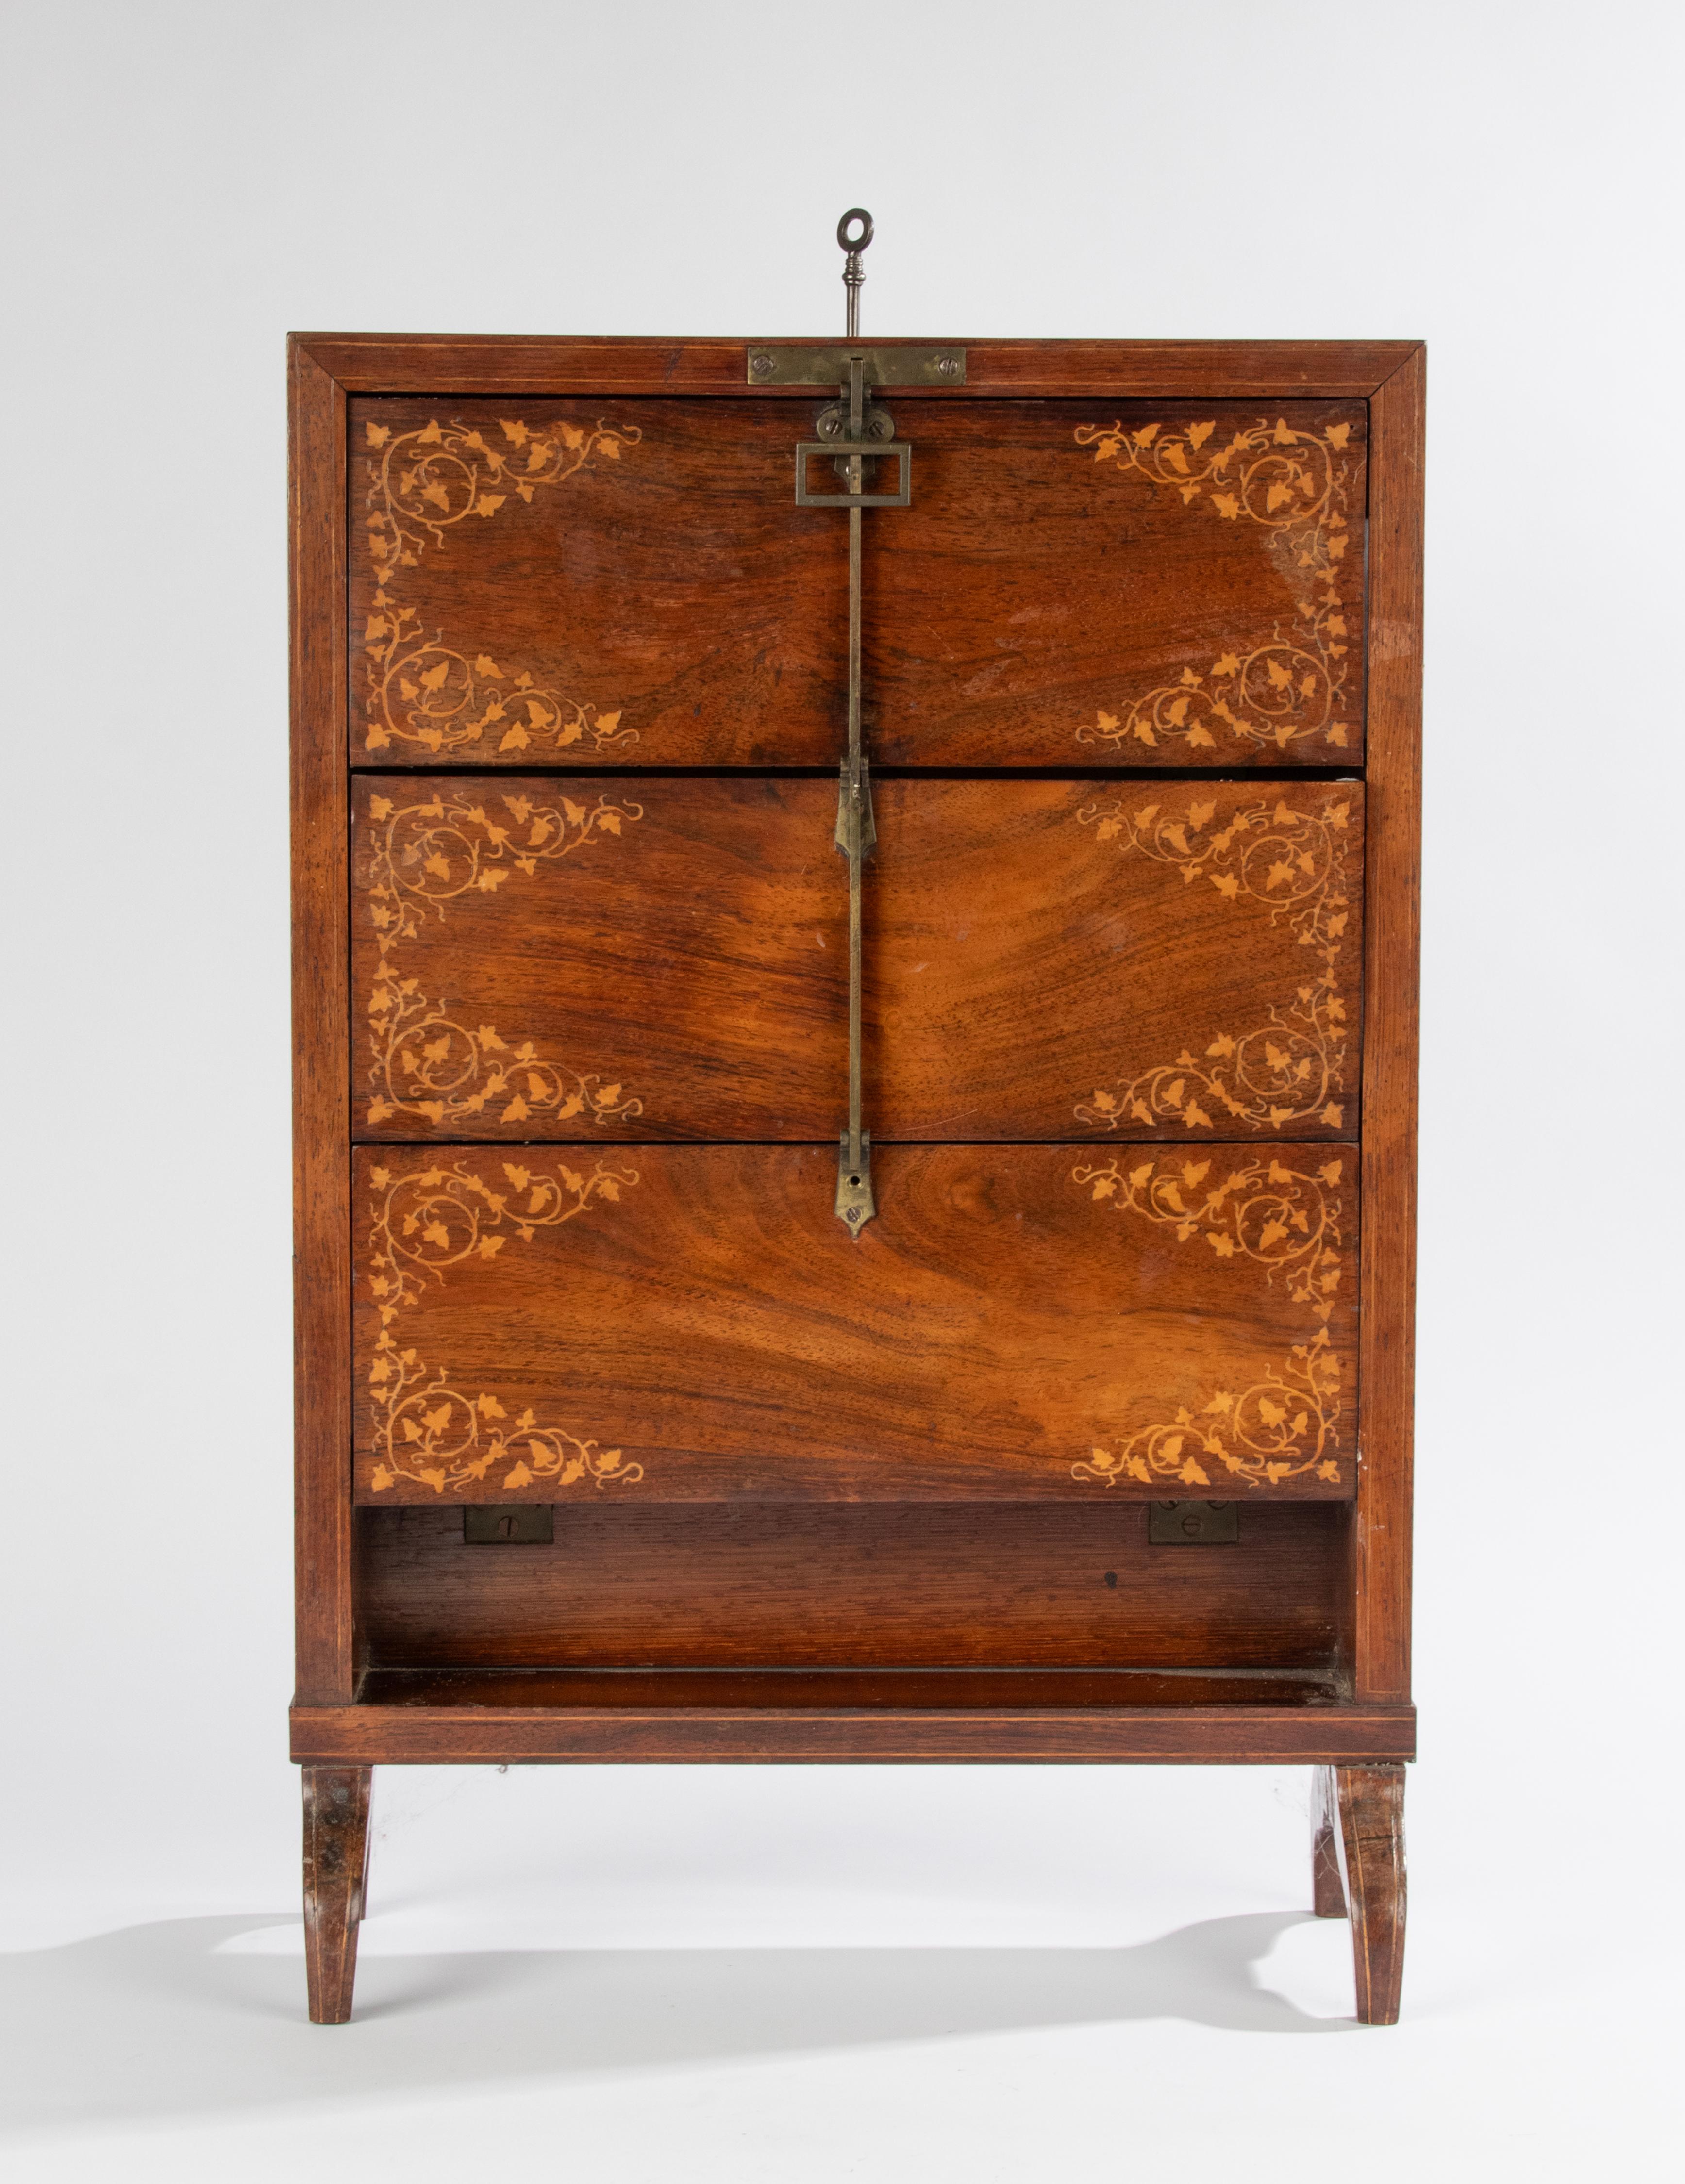 A antique desk cabinet for storing letters and cards. Made of wood veneer with foliage wood inlay. Made in France, circa 1870-1880
Note: one of the doors is slightly bent, see last picture
850
Dimensions: 60(h) x 41 x 18
Depth: storage compartment: